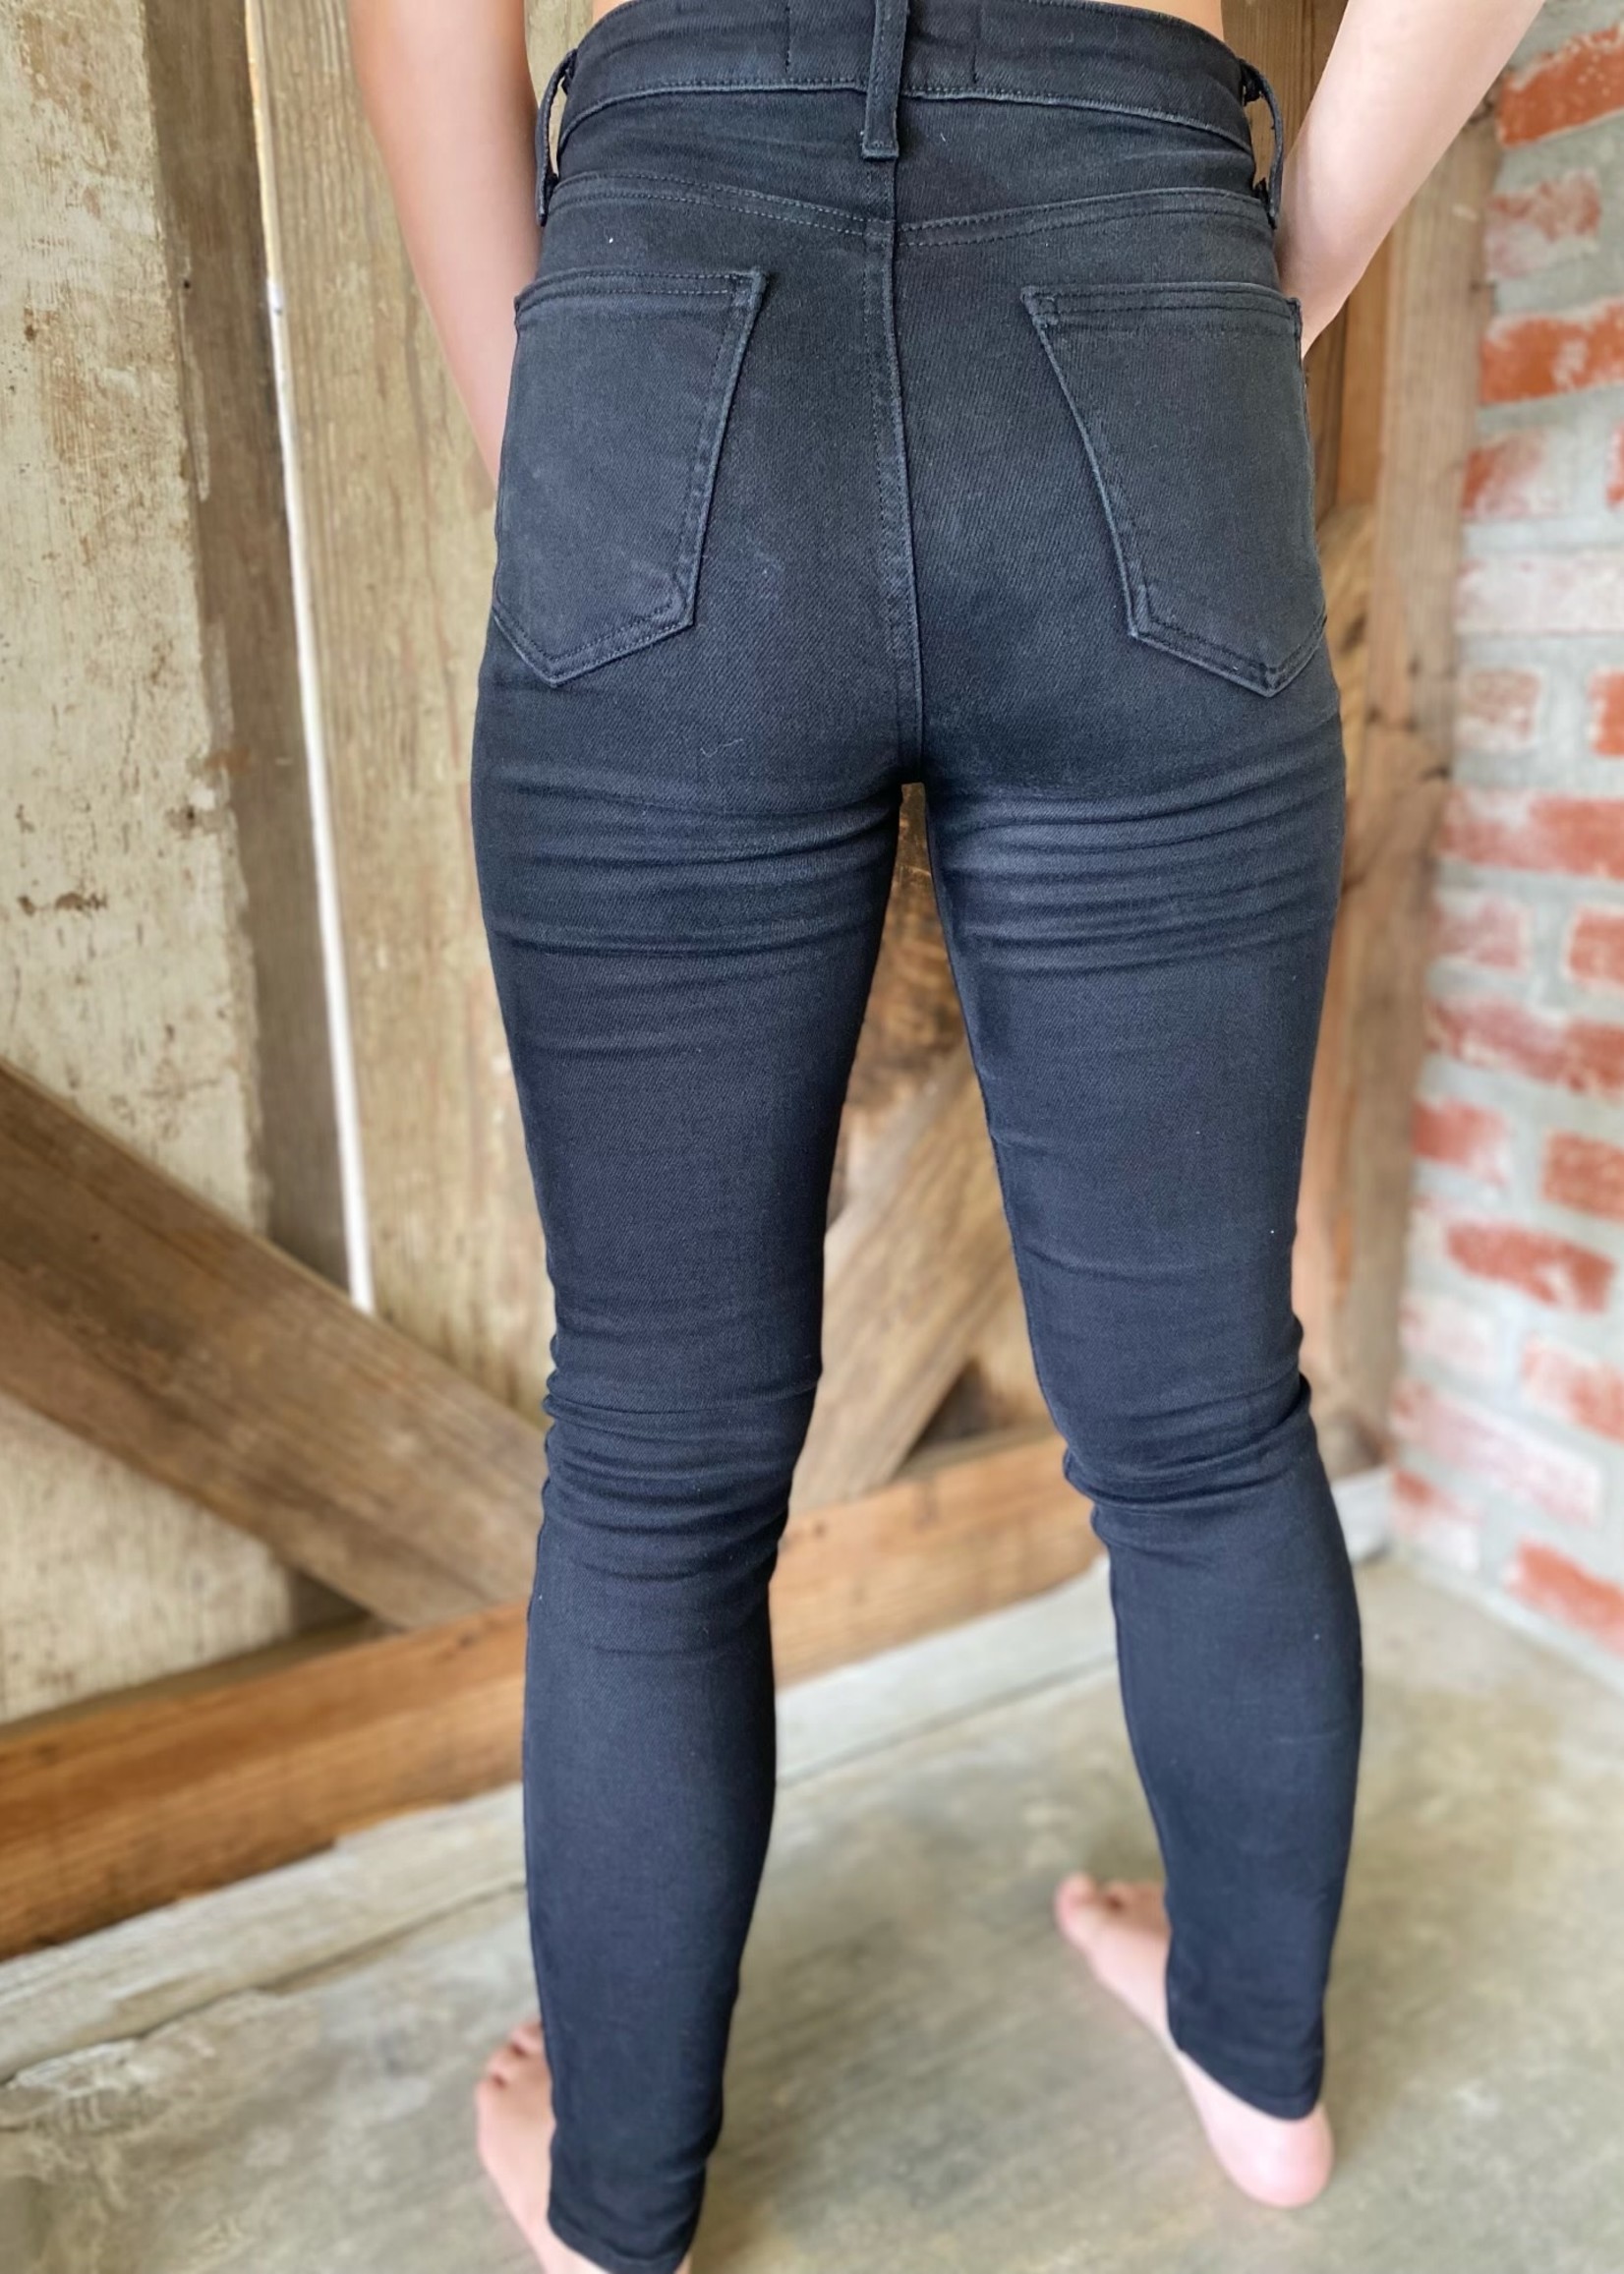 Bloom and Company Black 5 Button High Rise Skinny Jeans